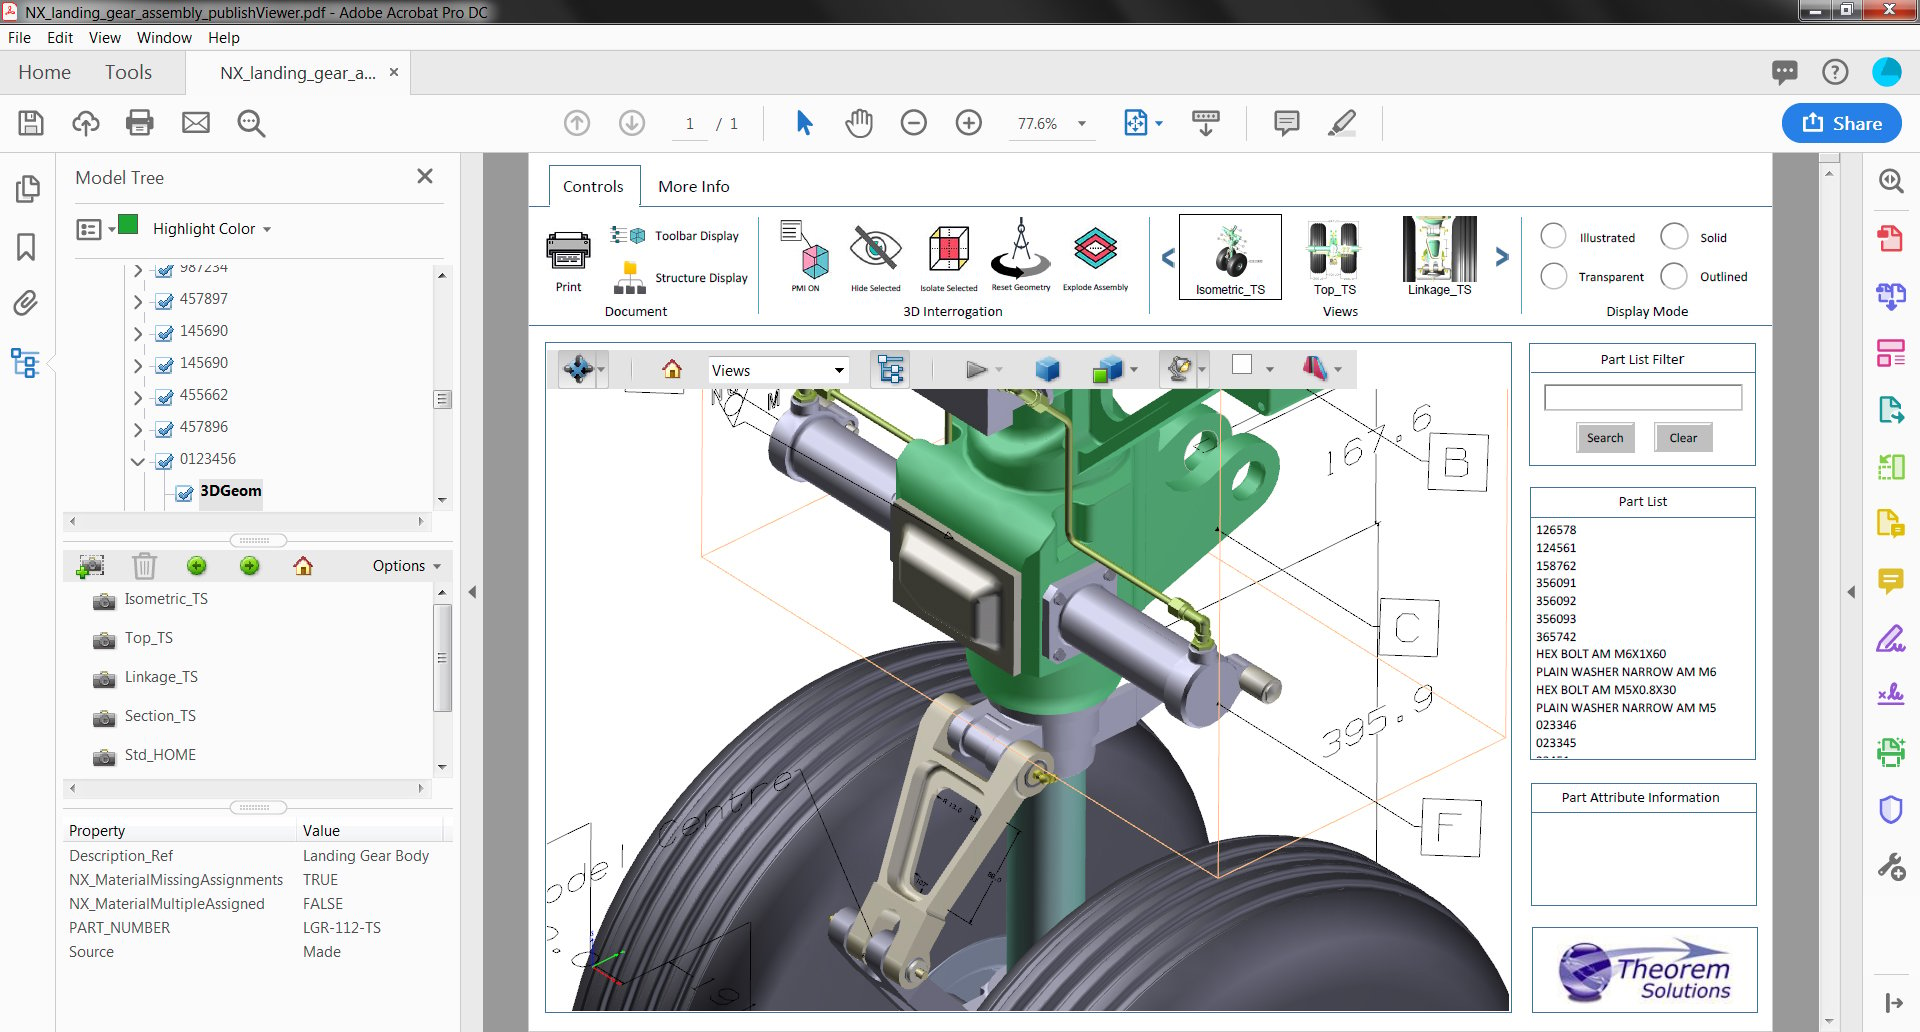 An image of a PDF document with a 3D model of a landing gear with measurements and annotations.